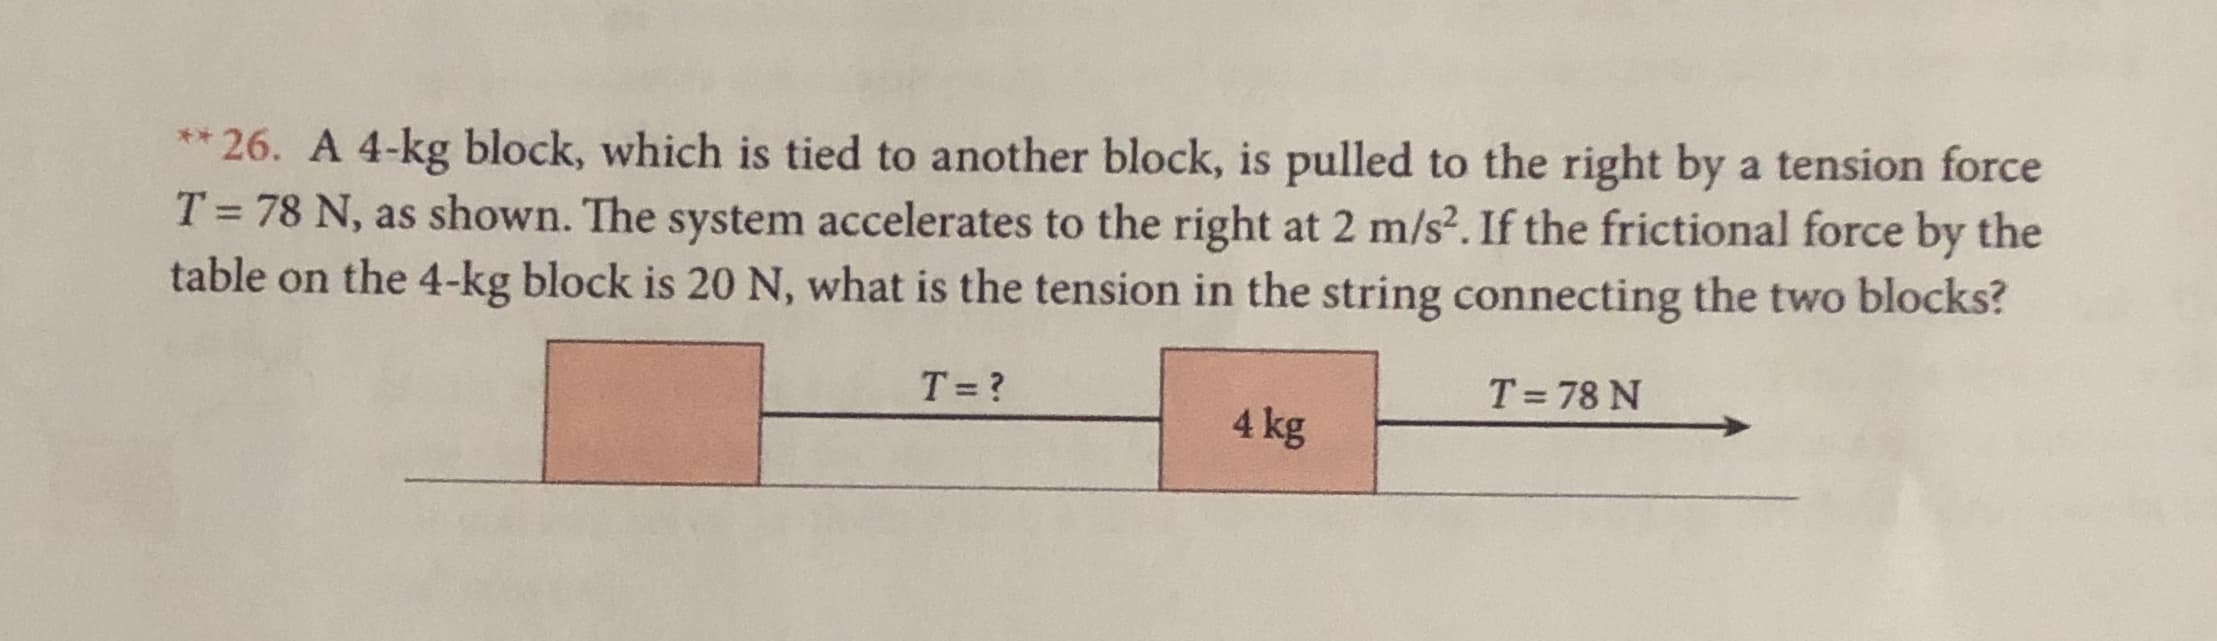 ** 26. A 4-kg block, which is tied to another block, is pulled to the right by a tension force
T 78 N, as shown. The system accelerates to the right at 2 m/s2. If the frictional force by the
table on the 4-kg block is 20 N, what is the tension in the string connecting the two blocks?
T 78 N
T ?
4 kg
